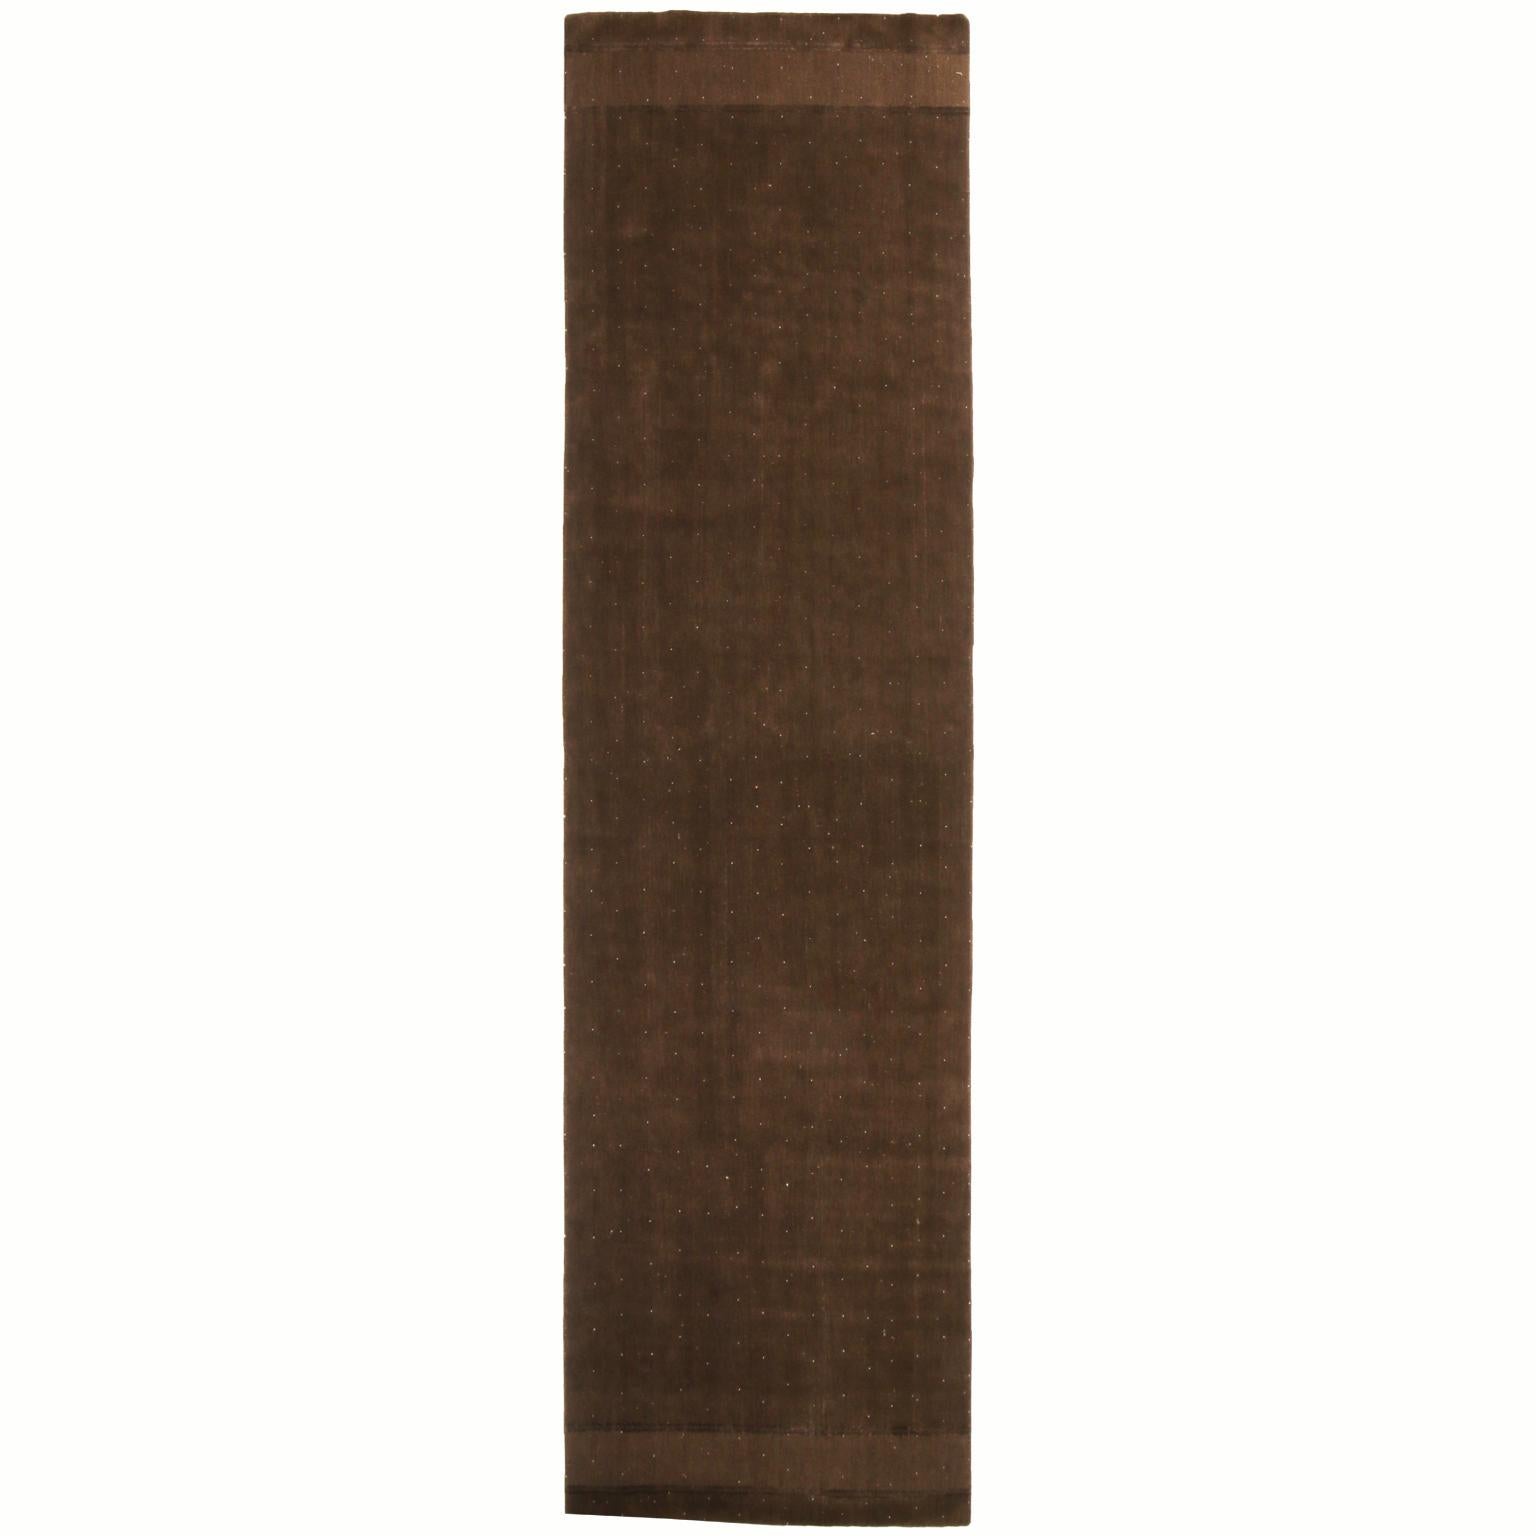 Hand knotted with high quality wool in Nepal, this geometric wool runner enjoys a tasteful oak and copper brown abrash background with finely woven white dot patterns throughout an all-over field design.
 